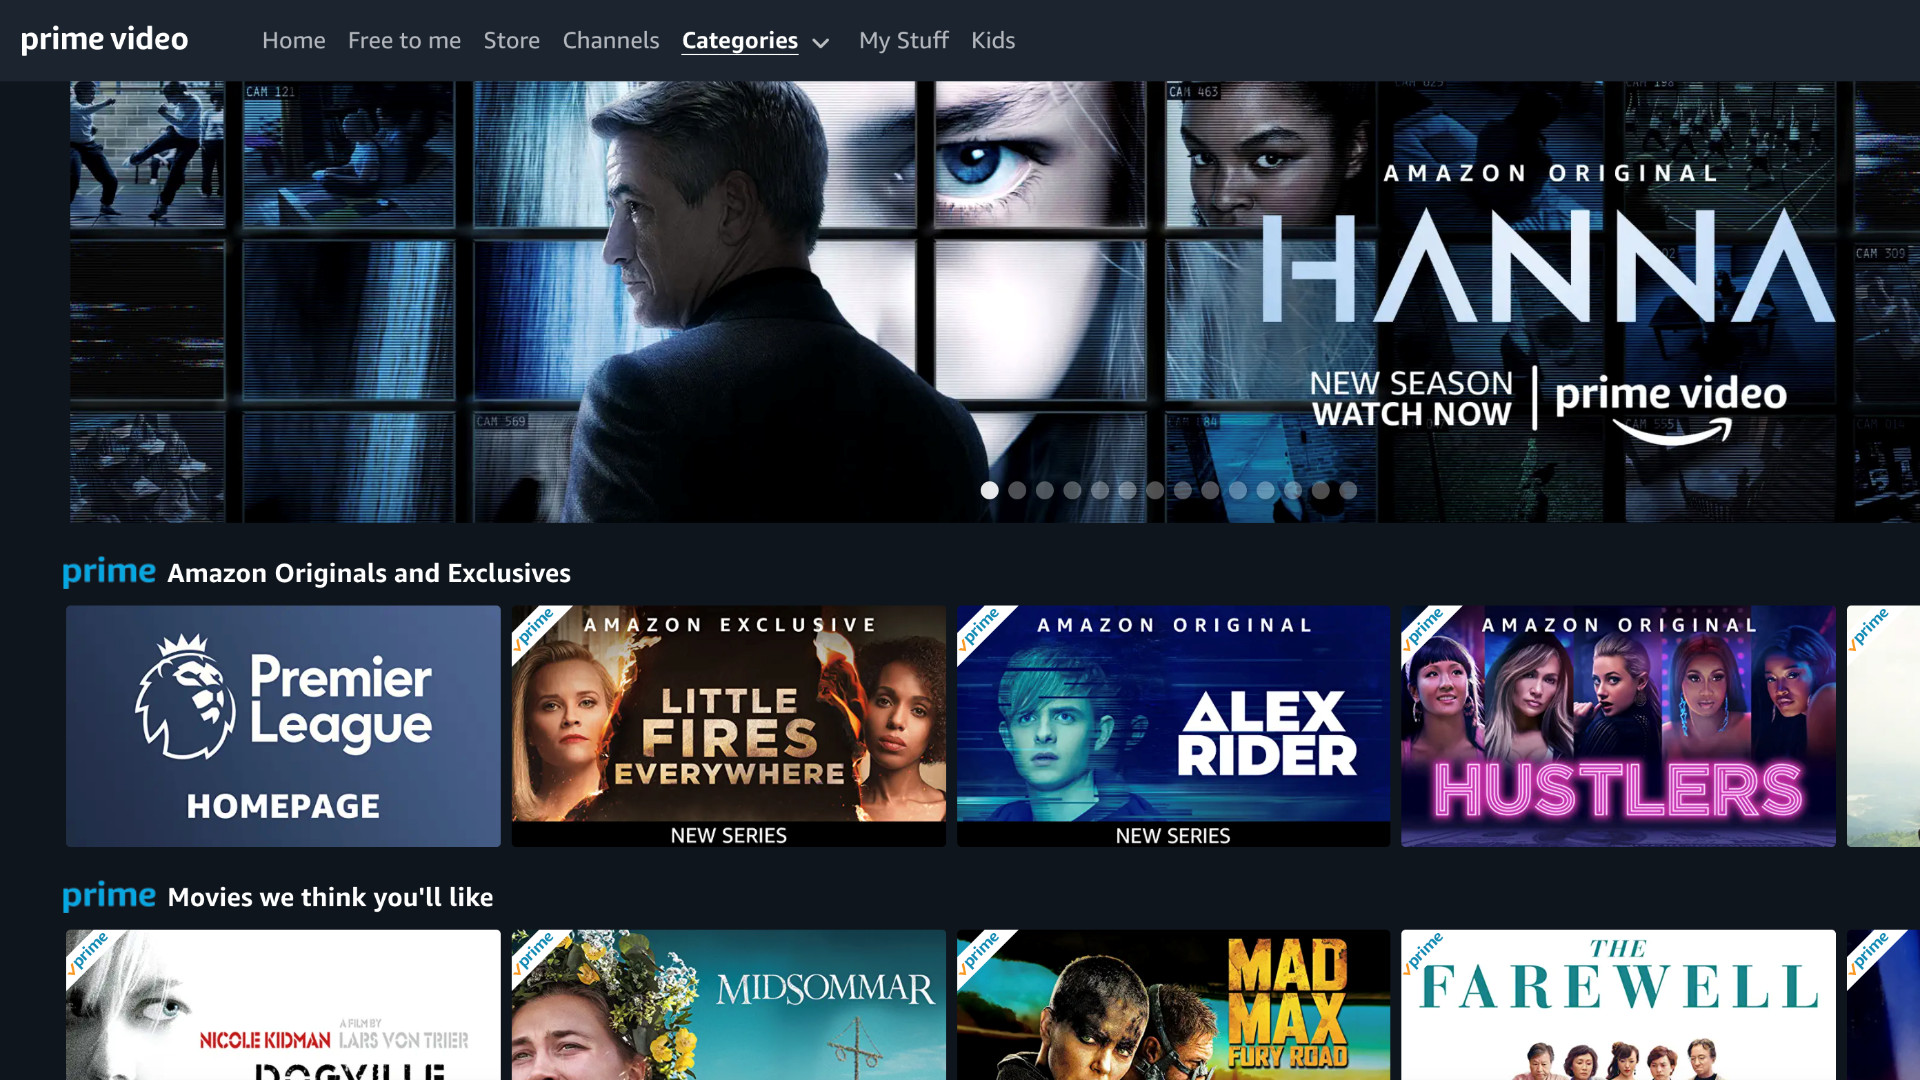 Amazon Prime Video finally adds separate profiles and watchlists for up